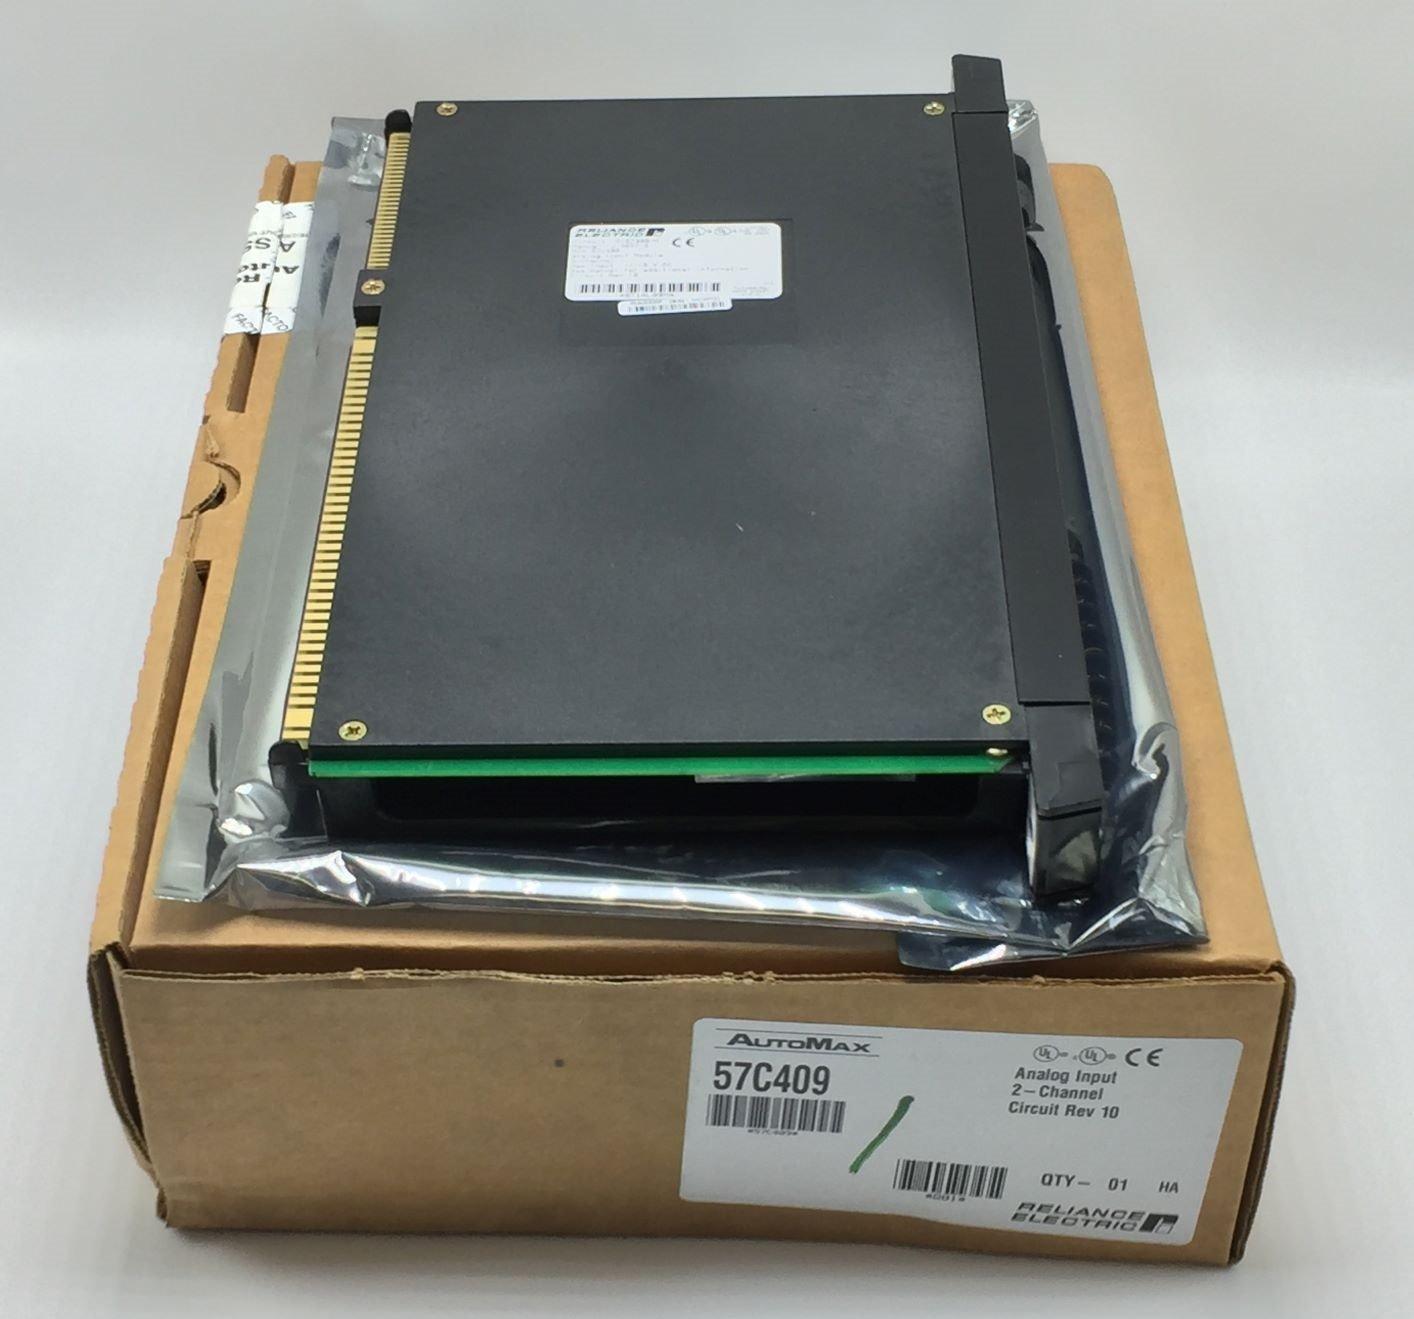 Primary image for Reliance Electric 57C409 Automax 2-Channel Input Module 15VDC 